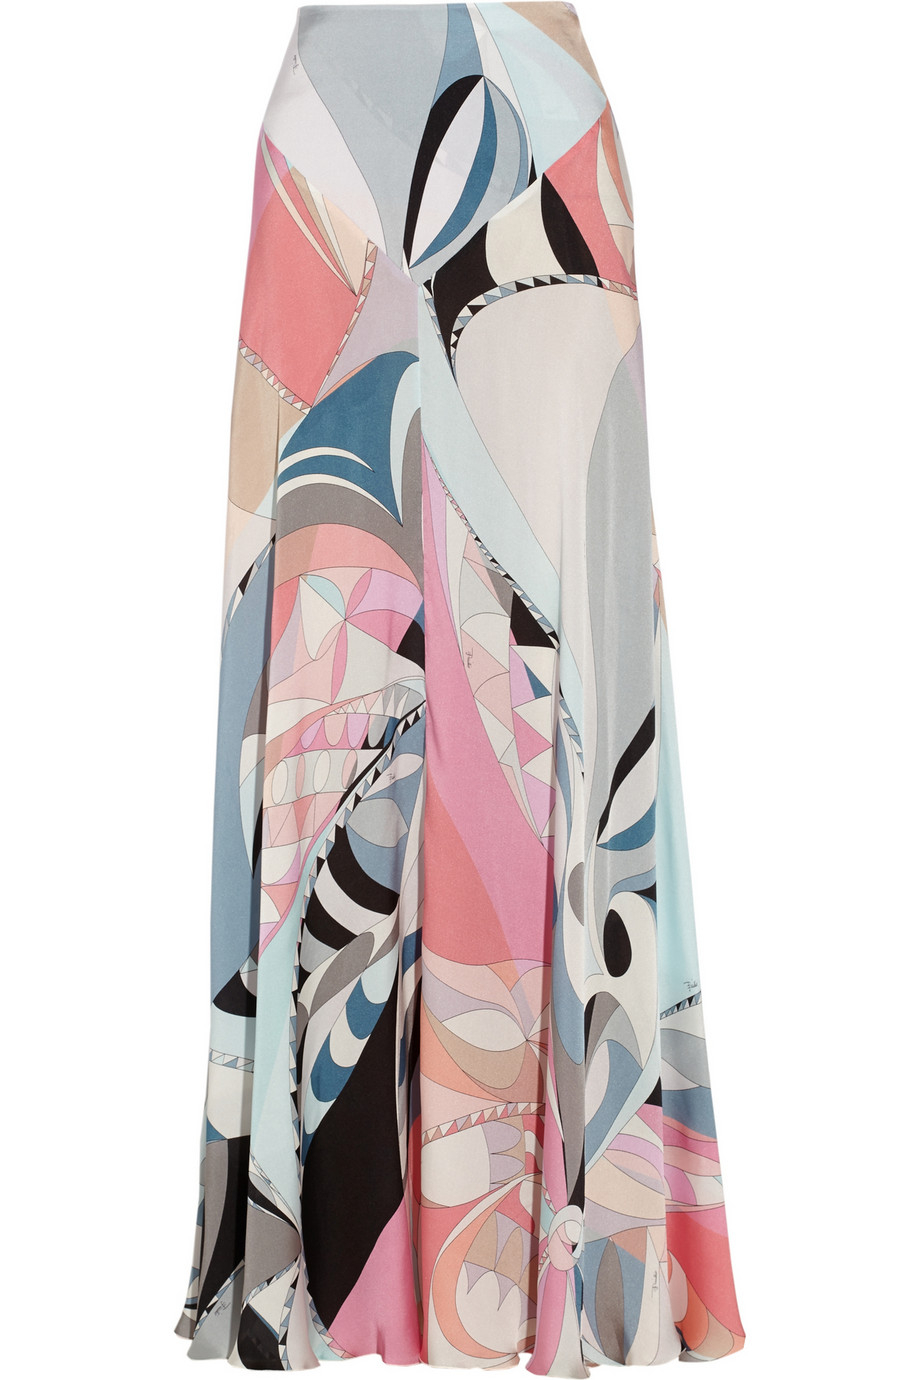 Lyst - Emilio Pucci Printed Silk-Charmeuse Maxi Skirt in Pink